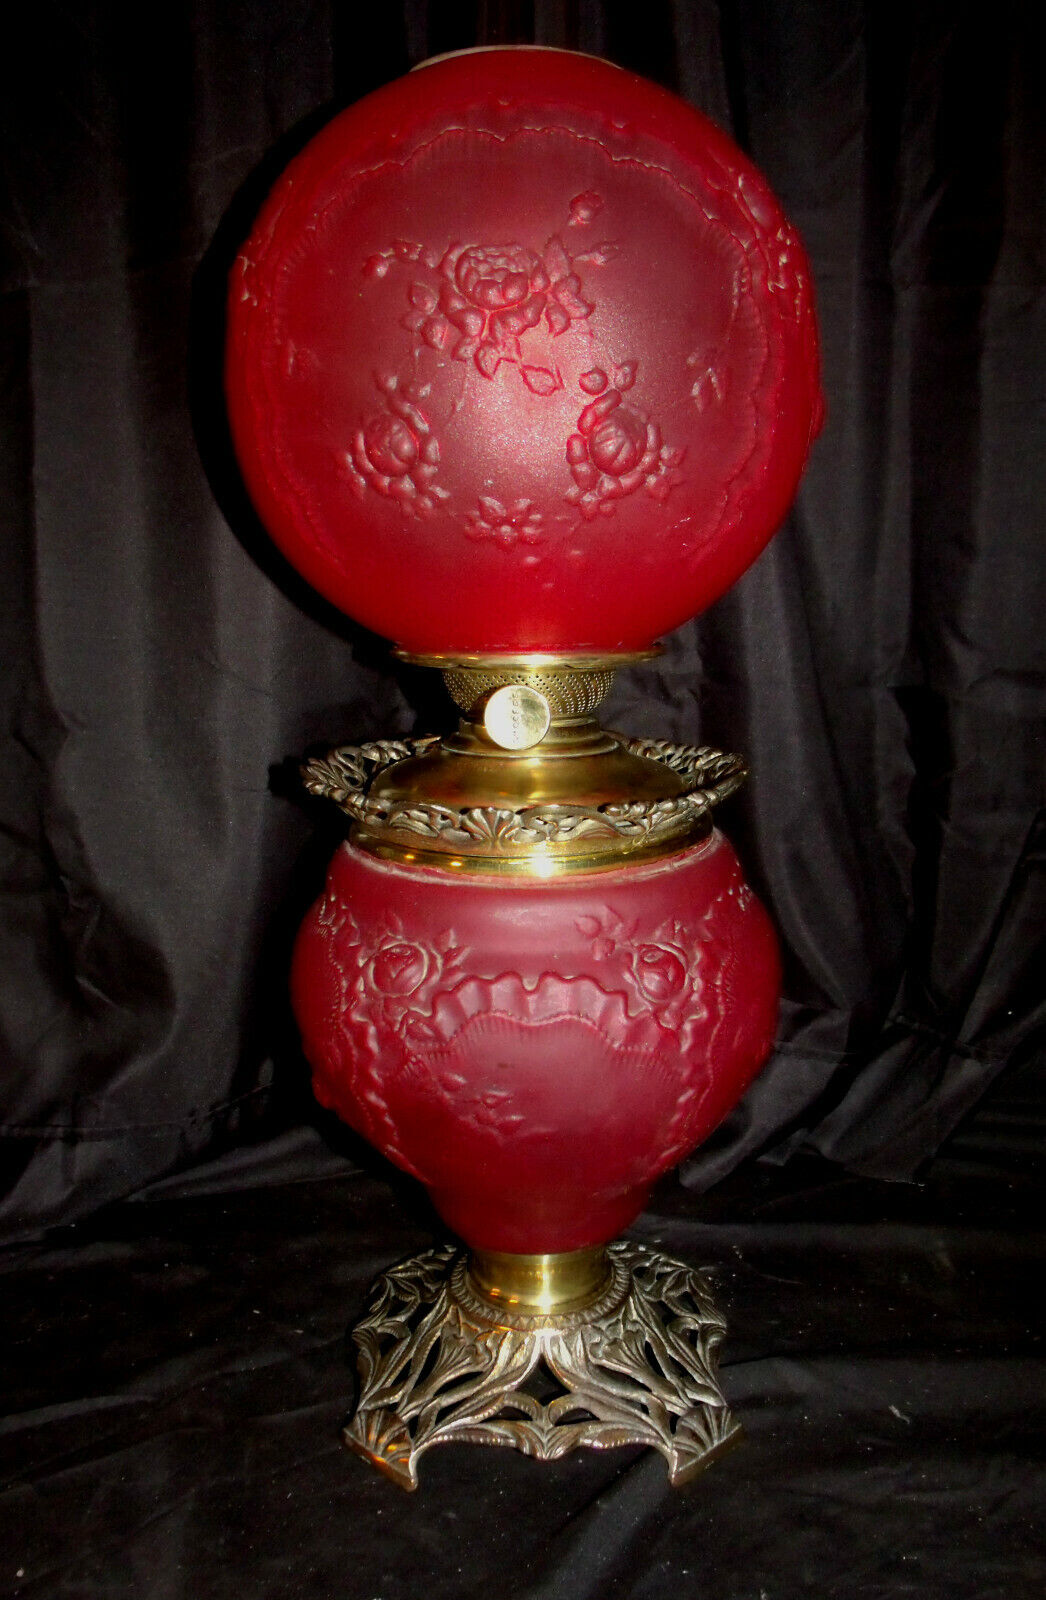  ANTIQUE PITTSBURGH  RED SATIN GLASS G.W.T.W.  OIL LAMP (RIBBONS & ROSES PATTERN